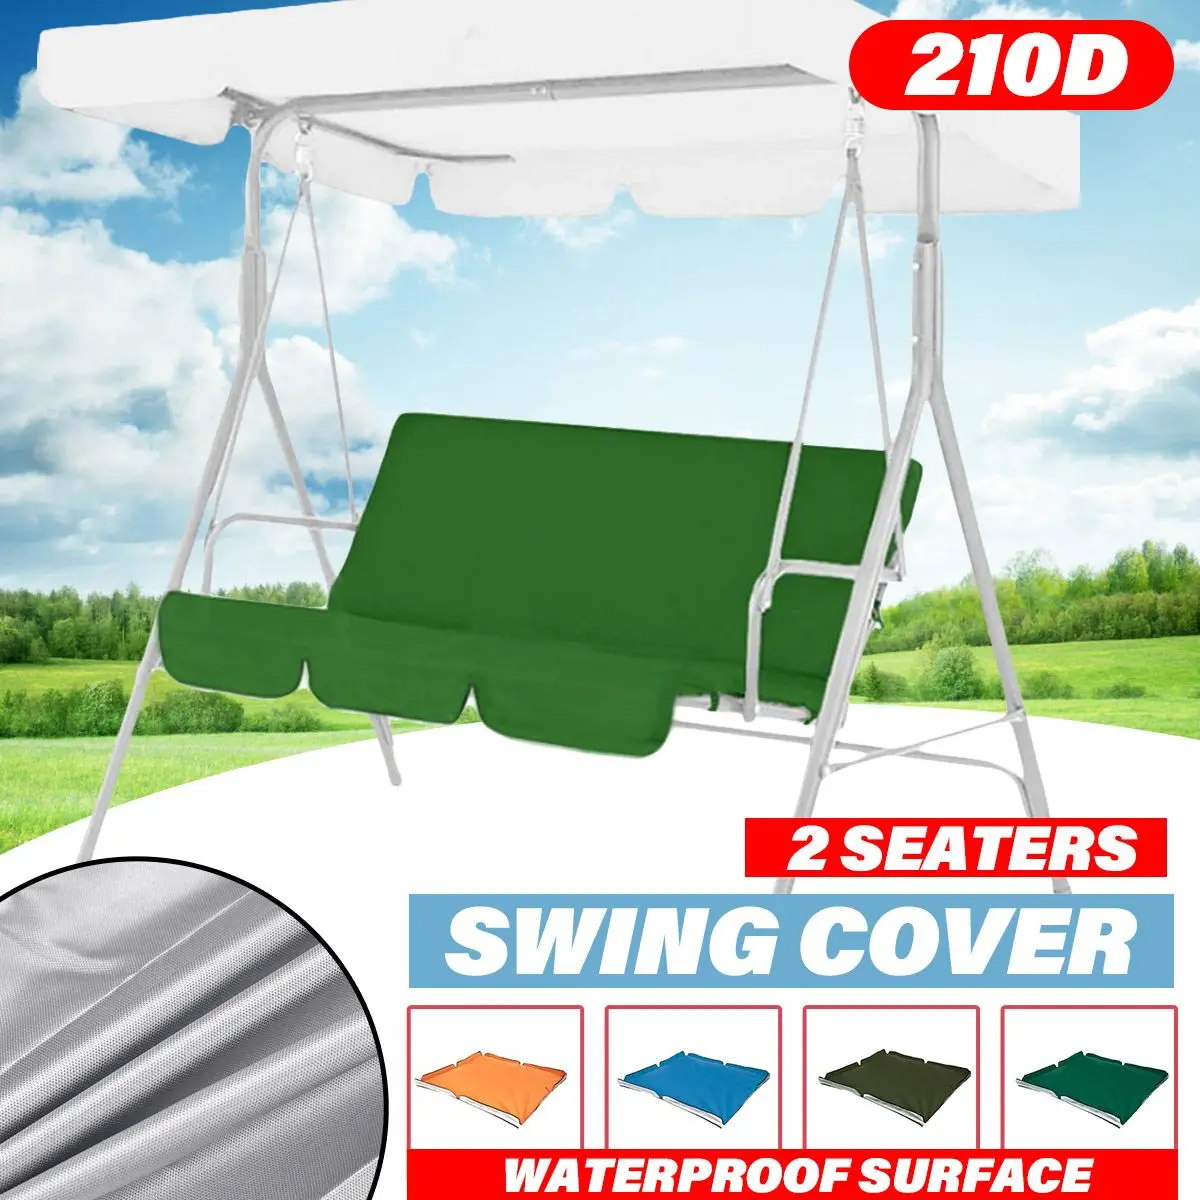 

210D Silver Coated Waterproof Cover Park Outdoor Patio Swing Bench Chair Backrest Seat Dustproof Sunshade Cover Canopy Shader